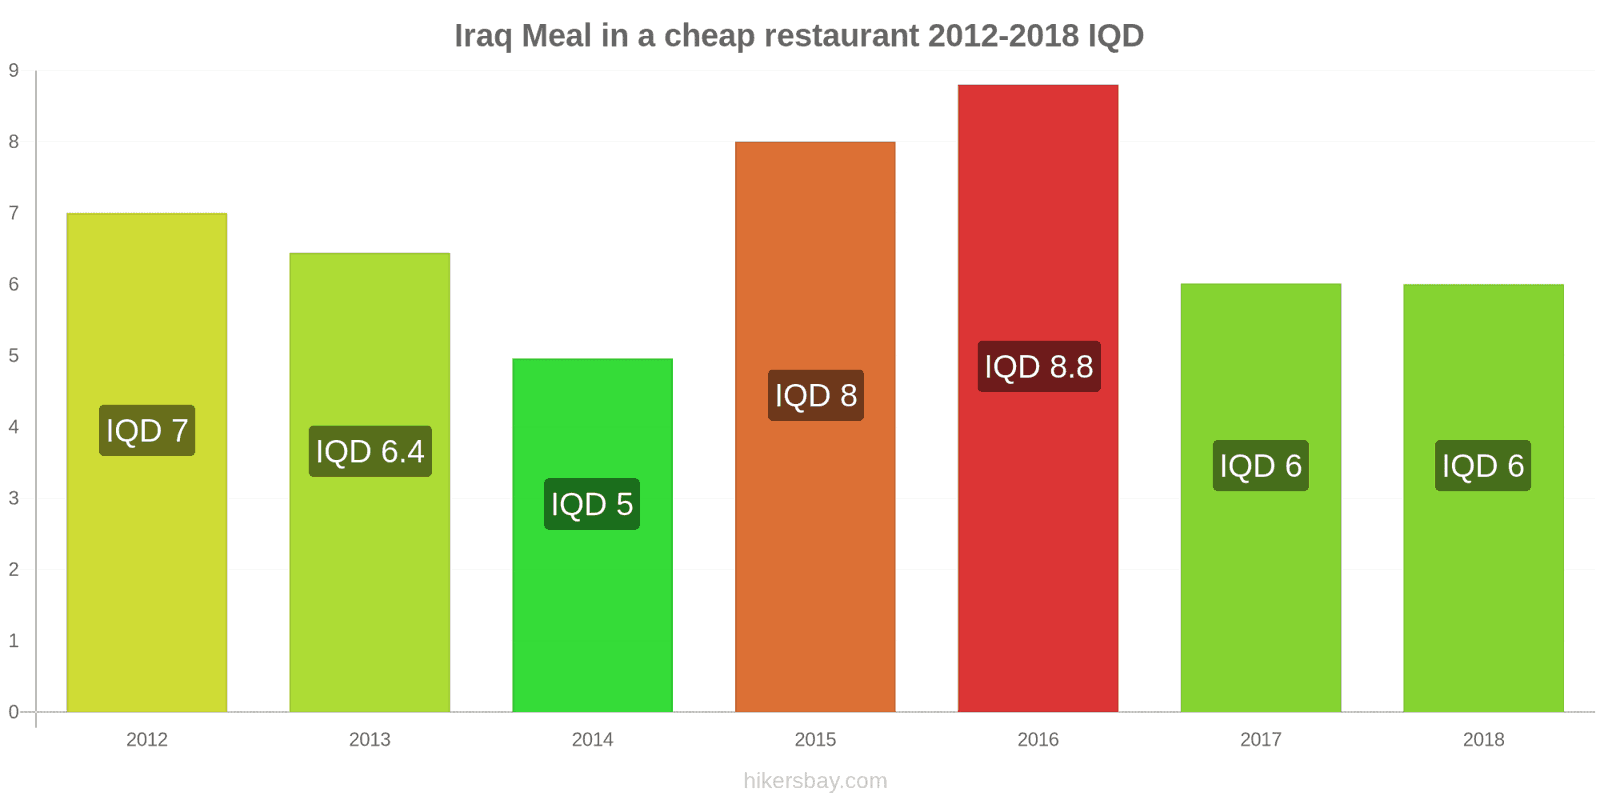 Iraq price changes Meal in a cheap restaurant hikersbay.com